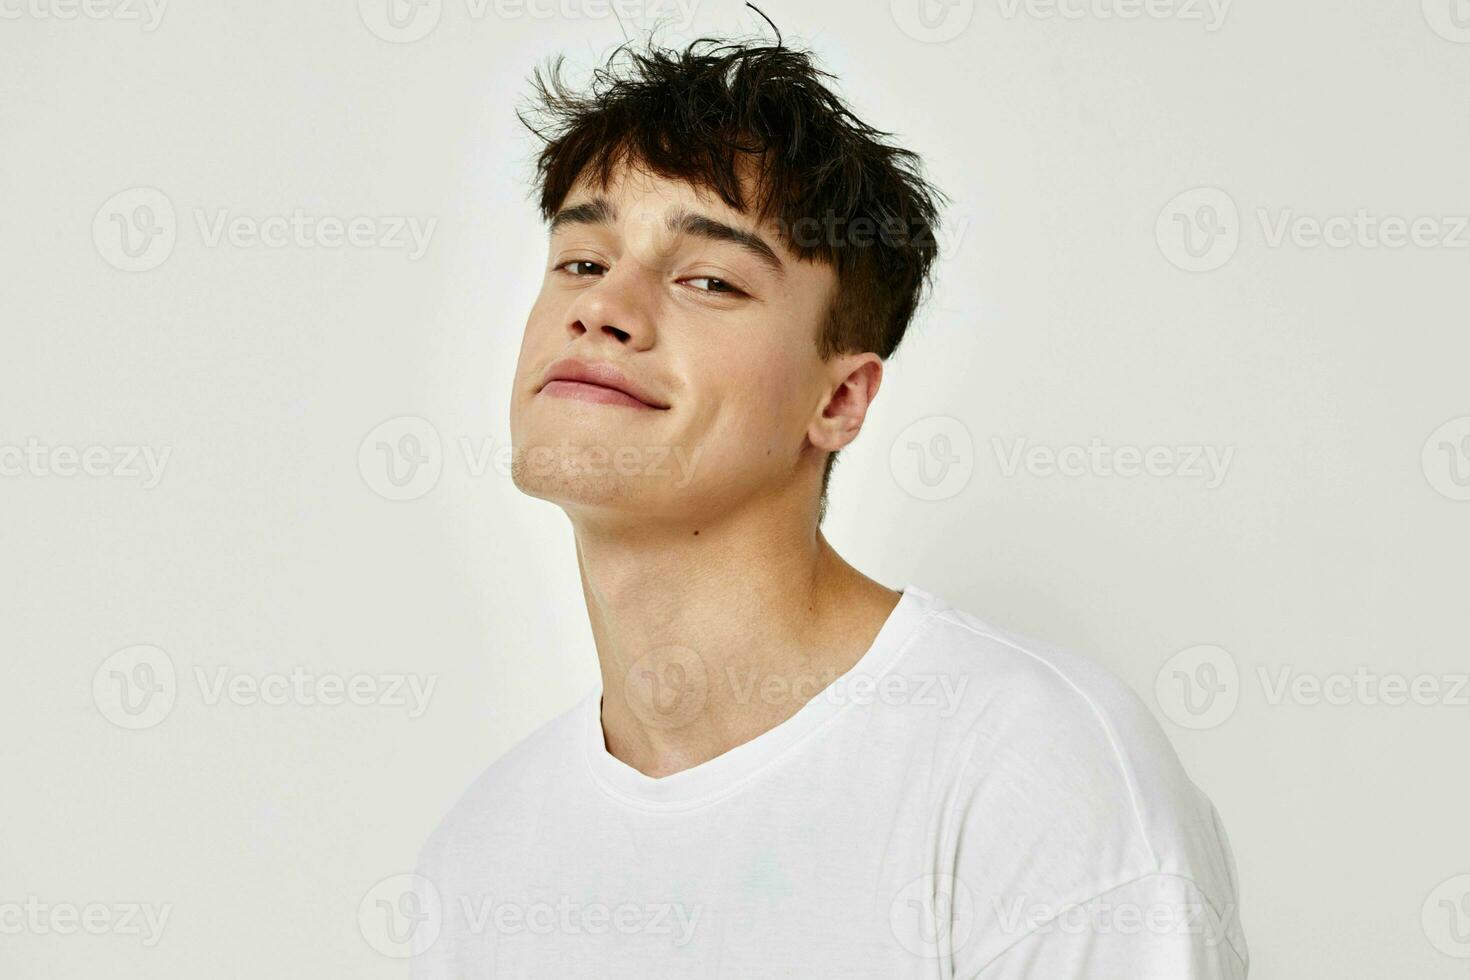 portrait of a young man modern youth style white t-shirt tattoo on the arm light background unaltered photo